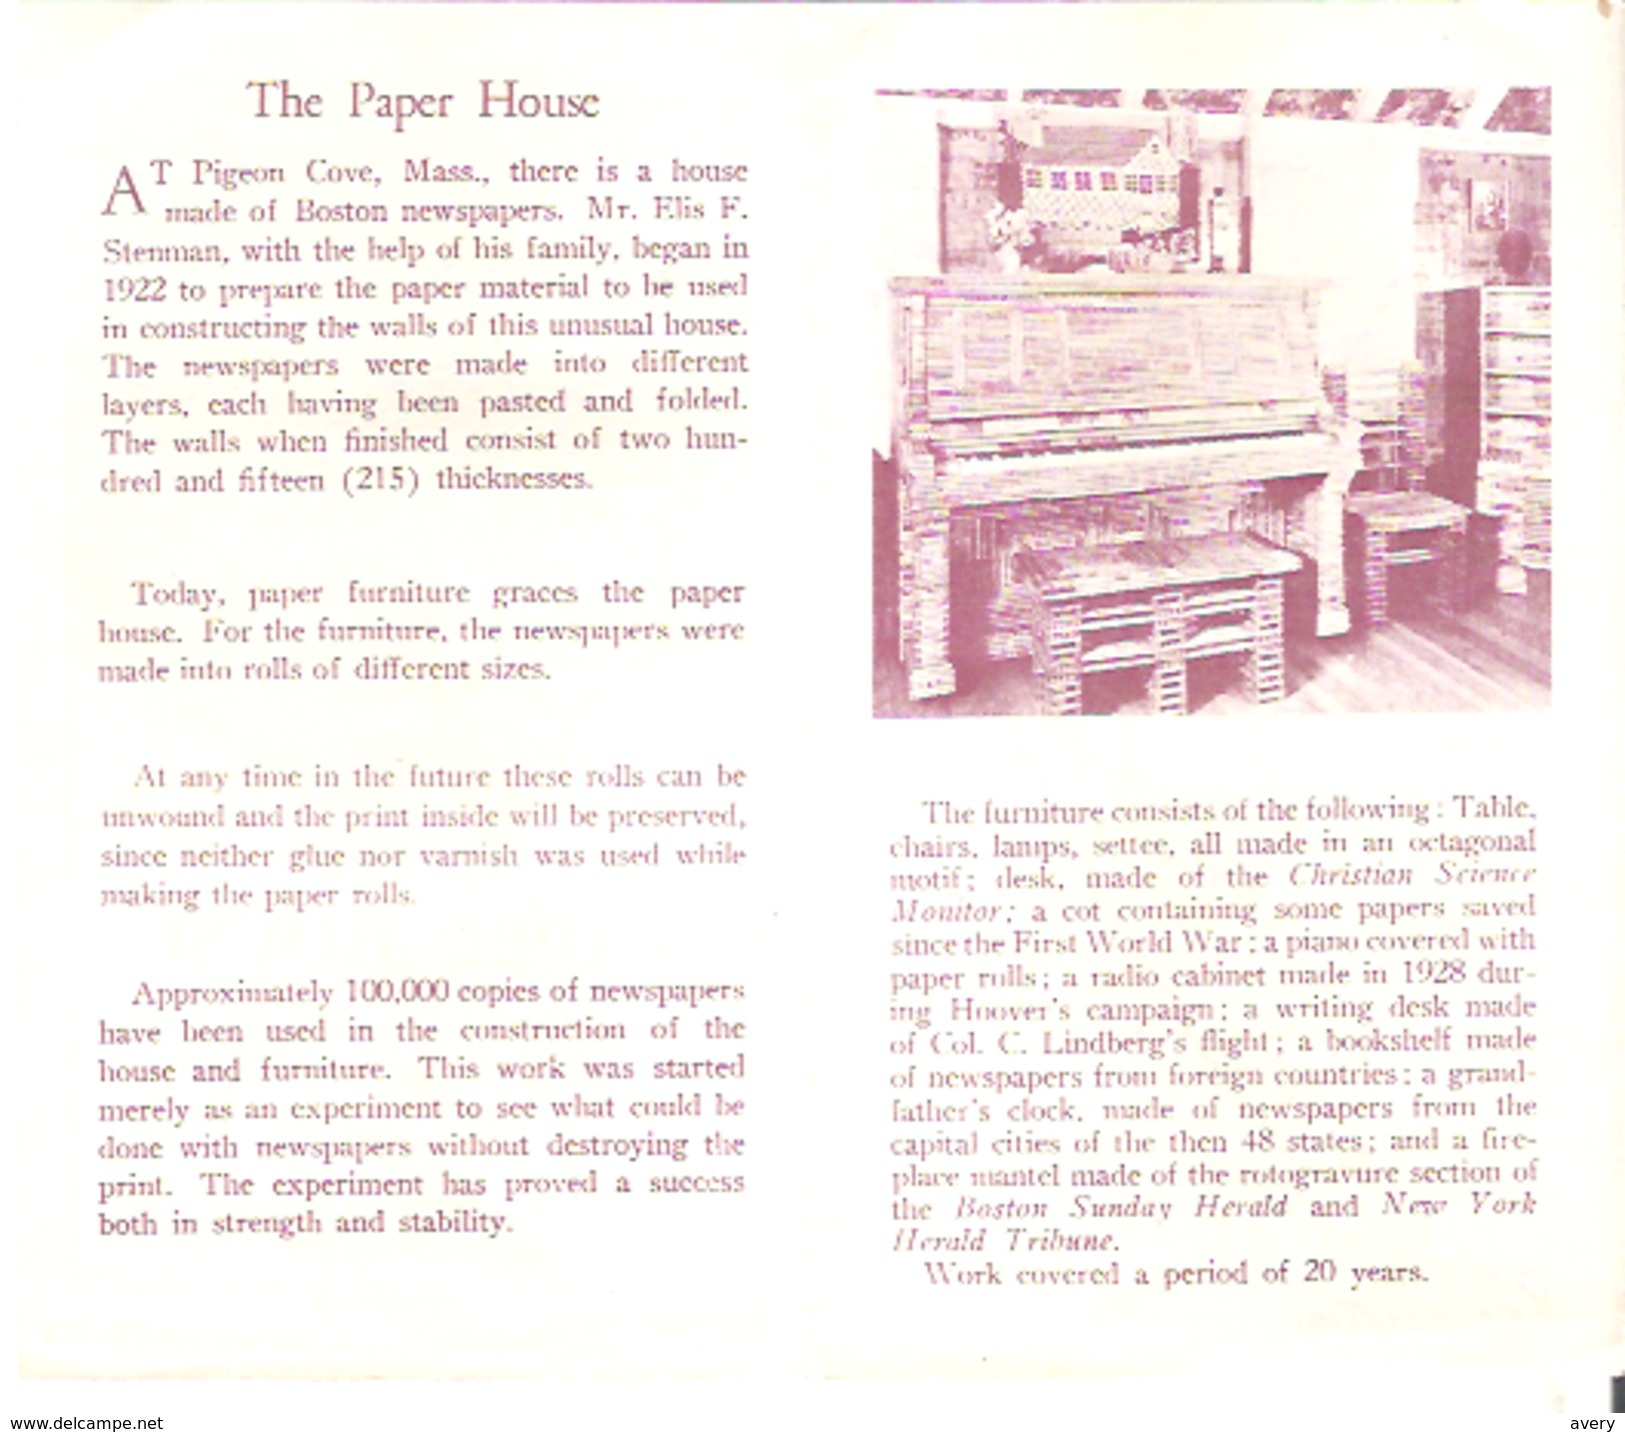 History Of The Paper House, Pigeon Cove, Massachusetts - Tourism Brochures